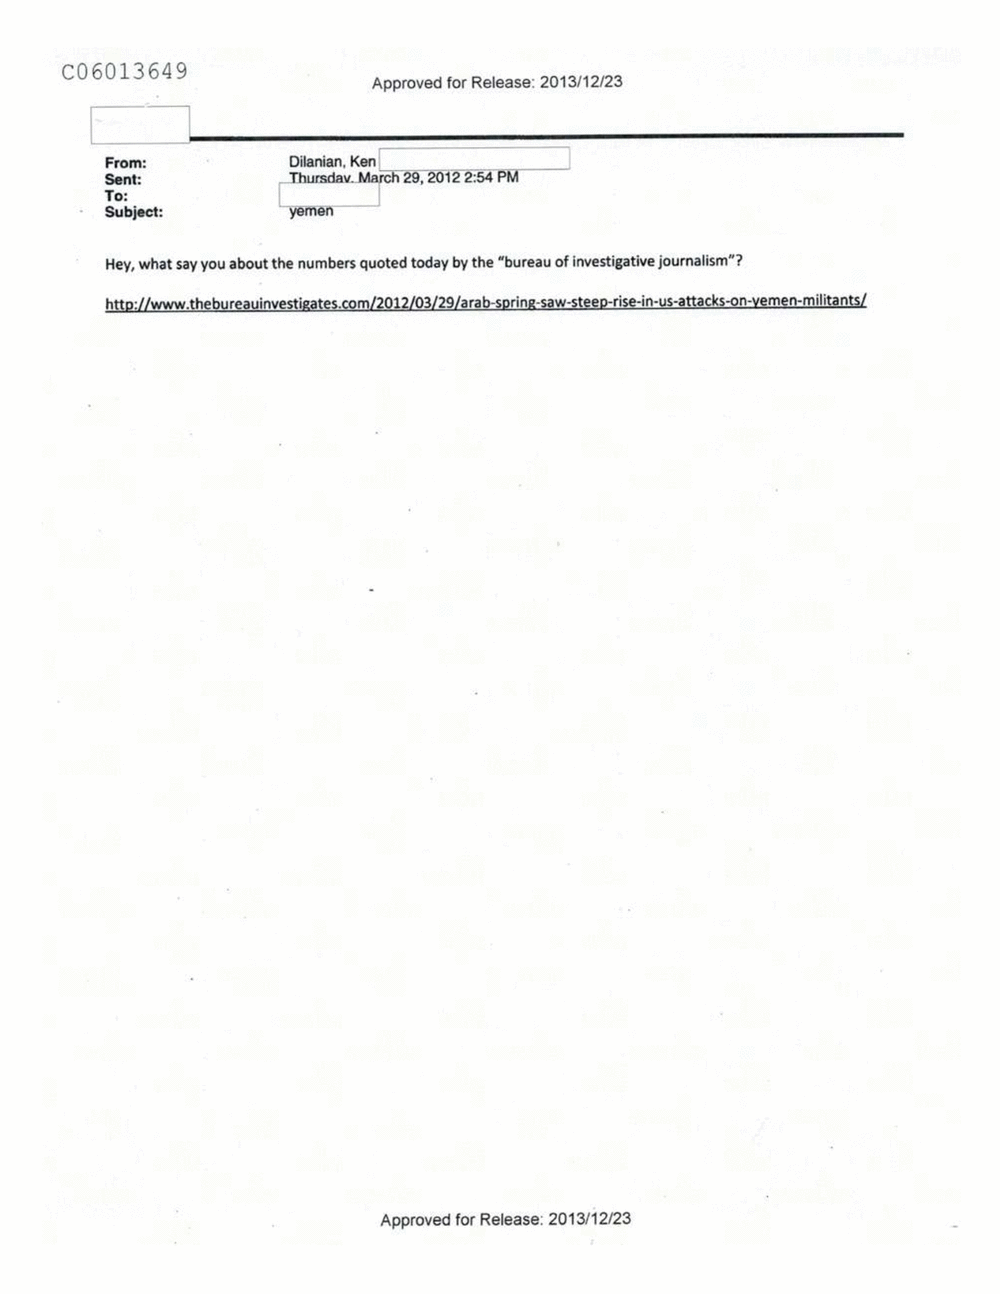 Page 499 from Email Correspondence Between Reporters and CIA Flacks